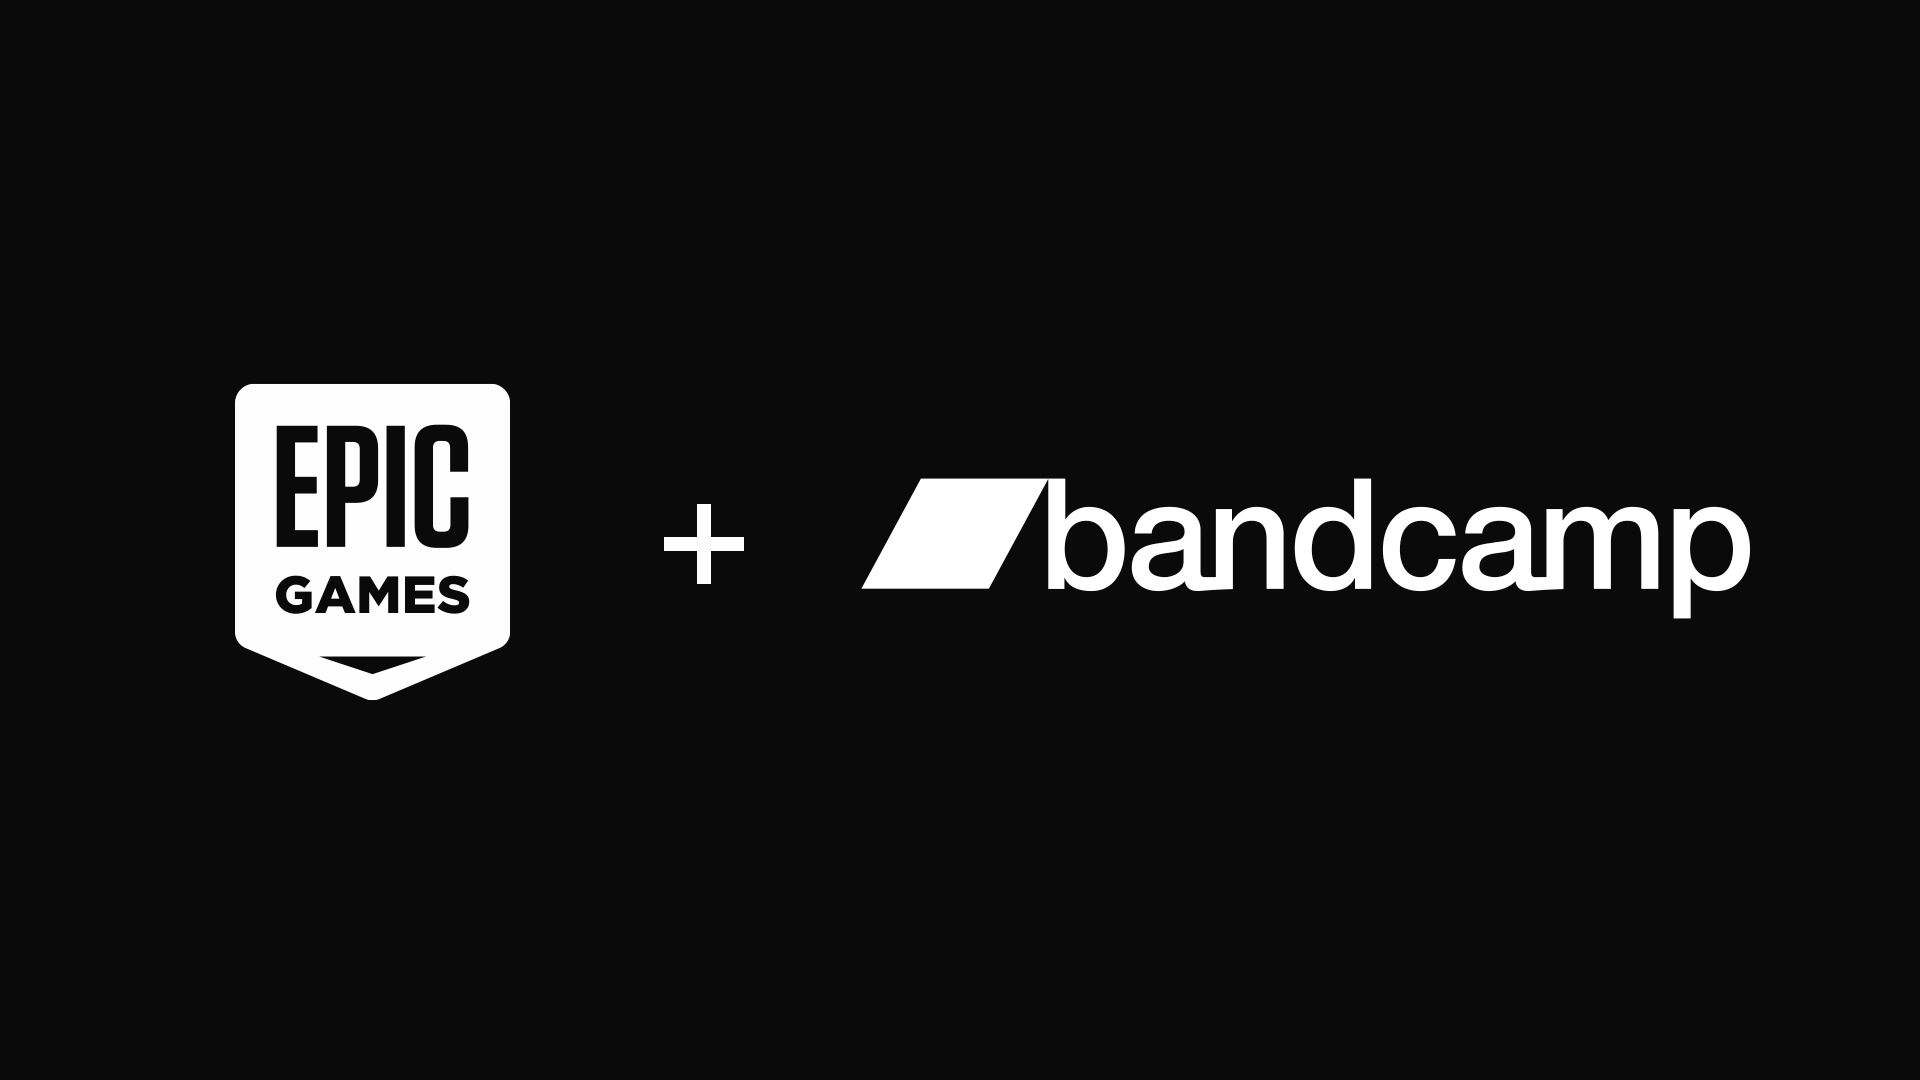 Epic Games has acquired Bandcamp